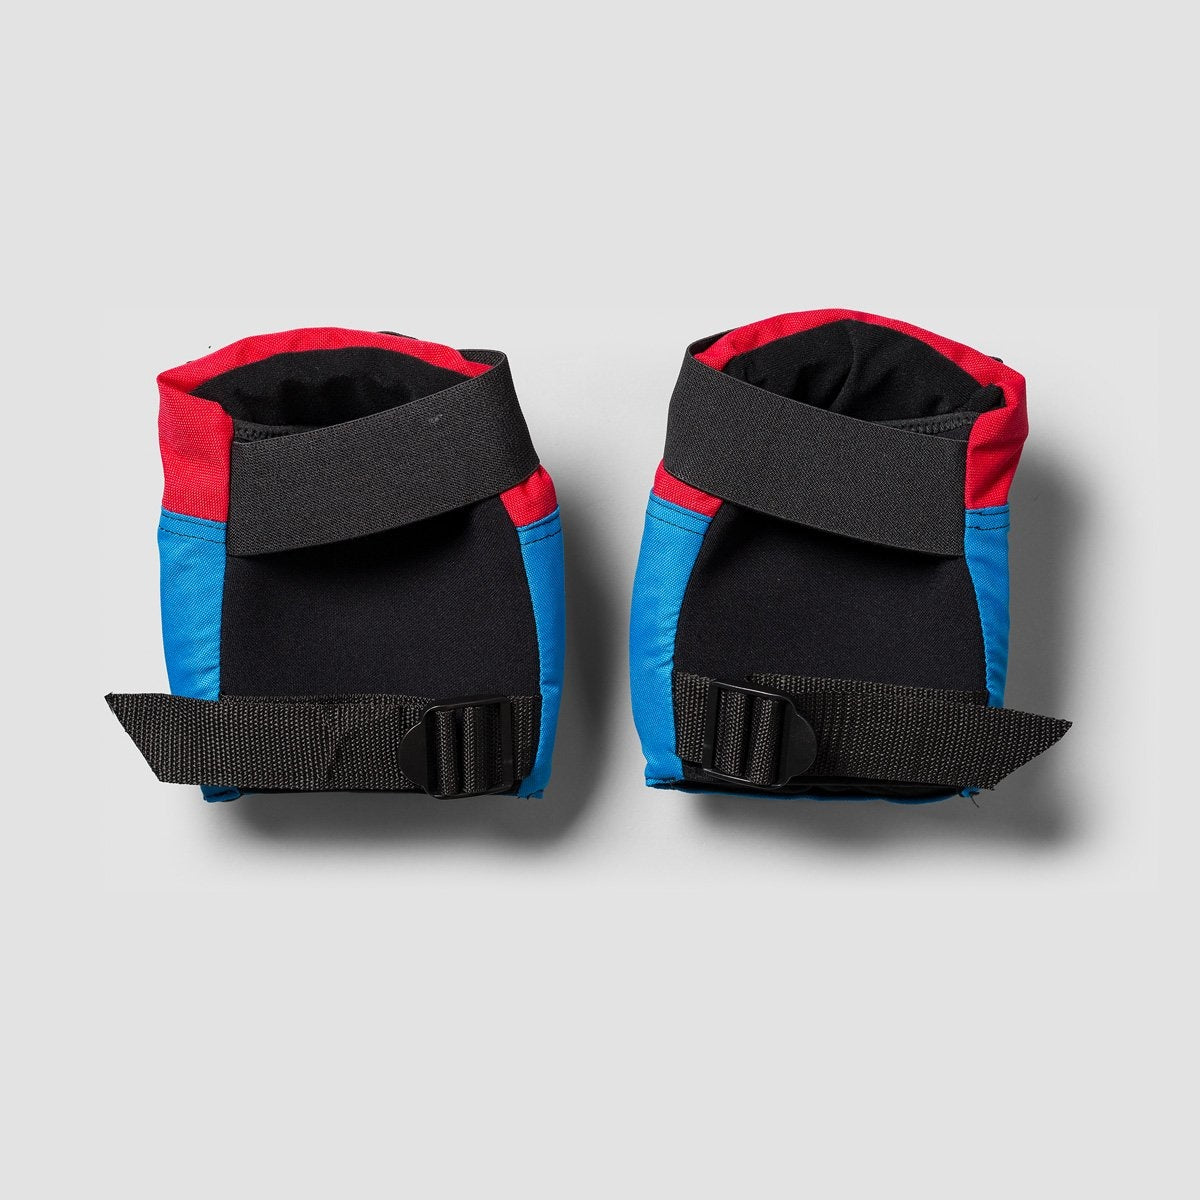 187 Killer Fly Knee Pads Red/White/Blue - Safety Gear